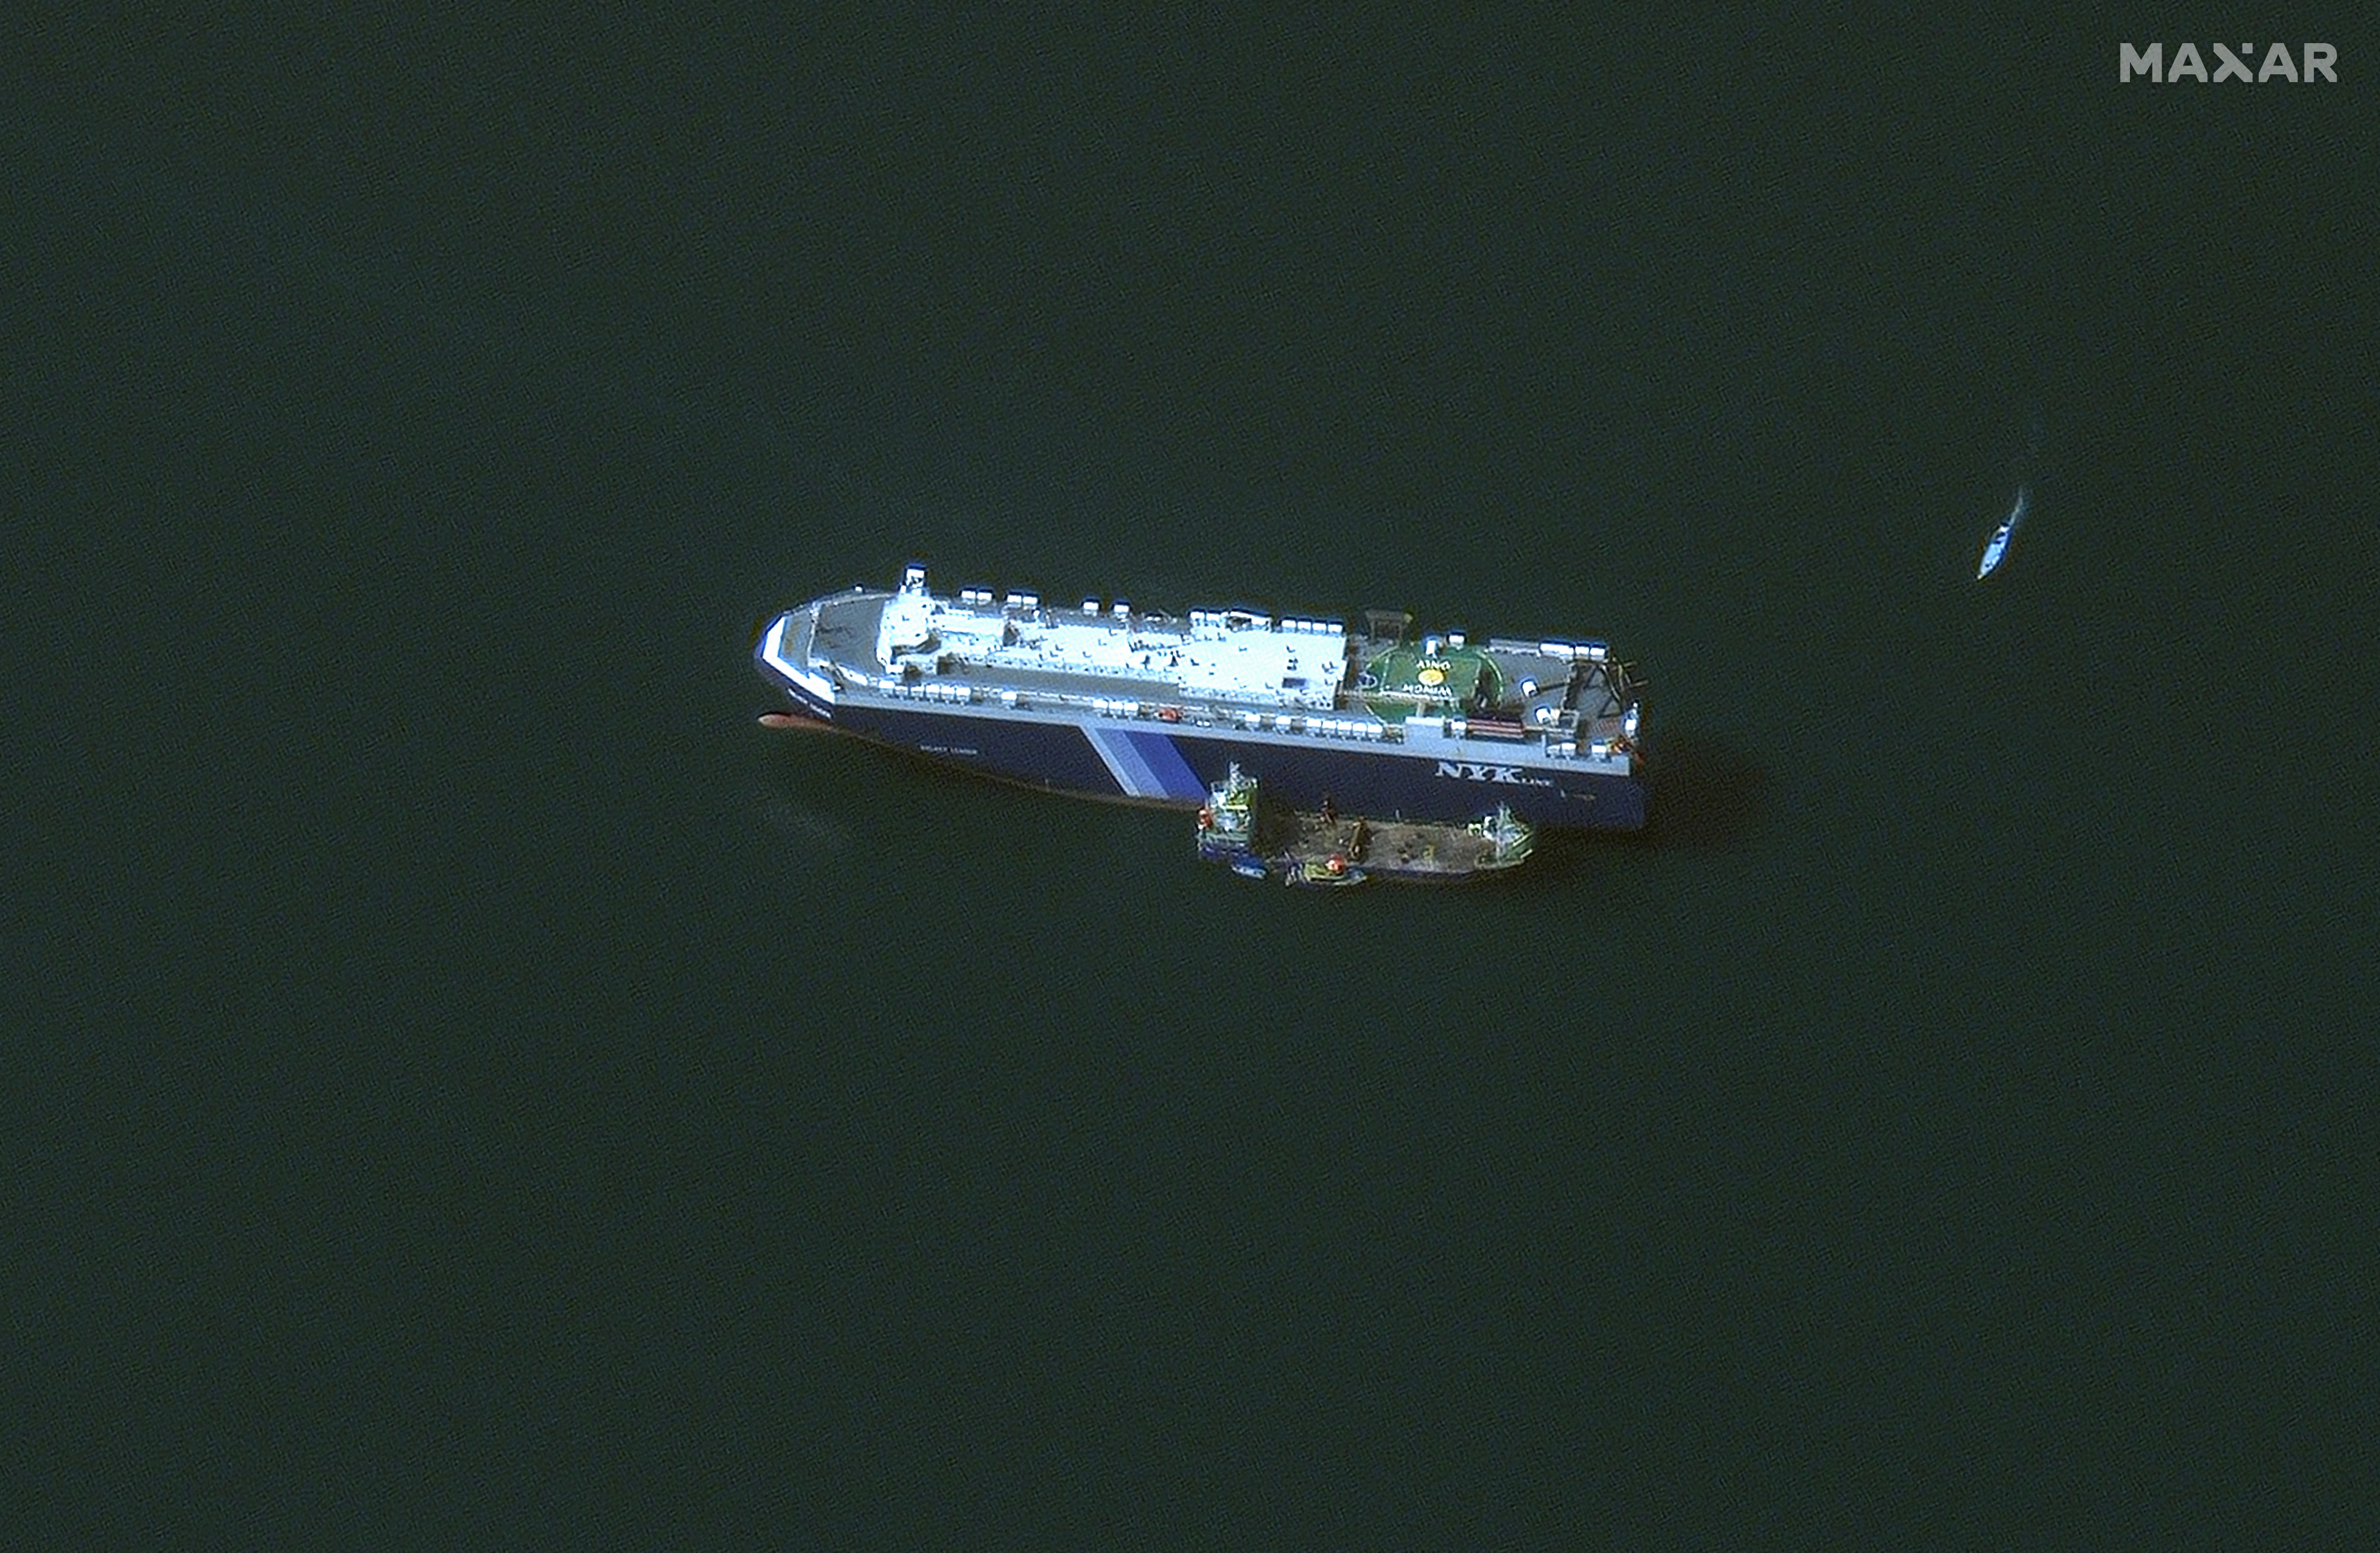 A satellite image released by Maxar Technologies shows the recently seized Israeli-linked Galaxy Leader ship, that was captured by Houthi fighters on November 19. /Maxar Technologies